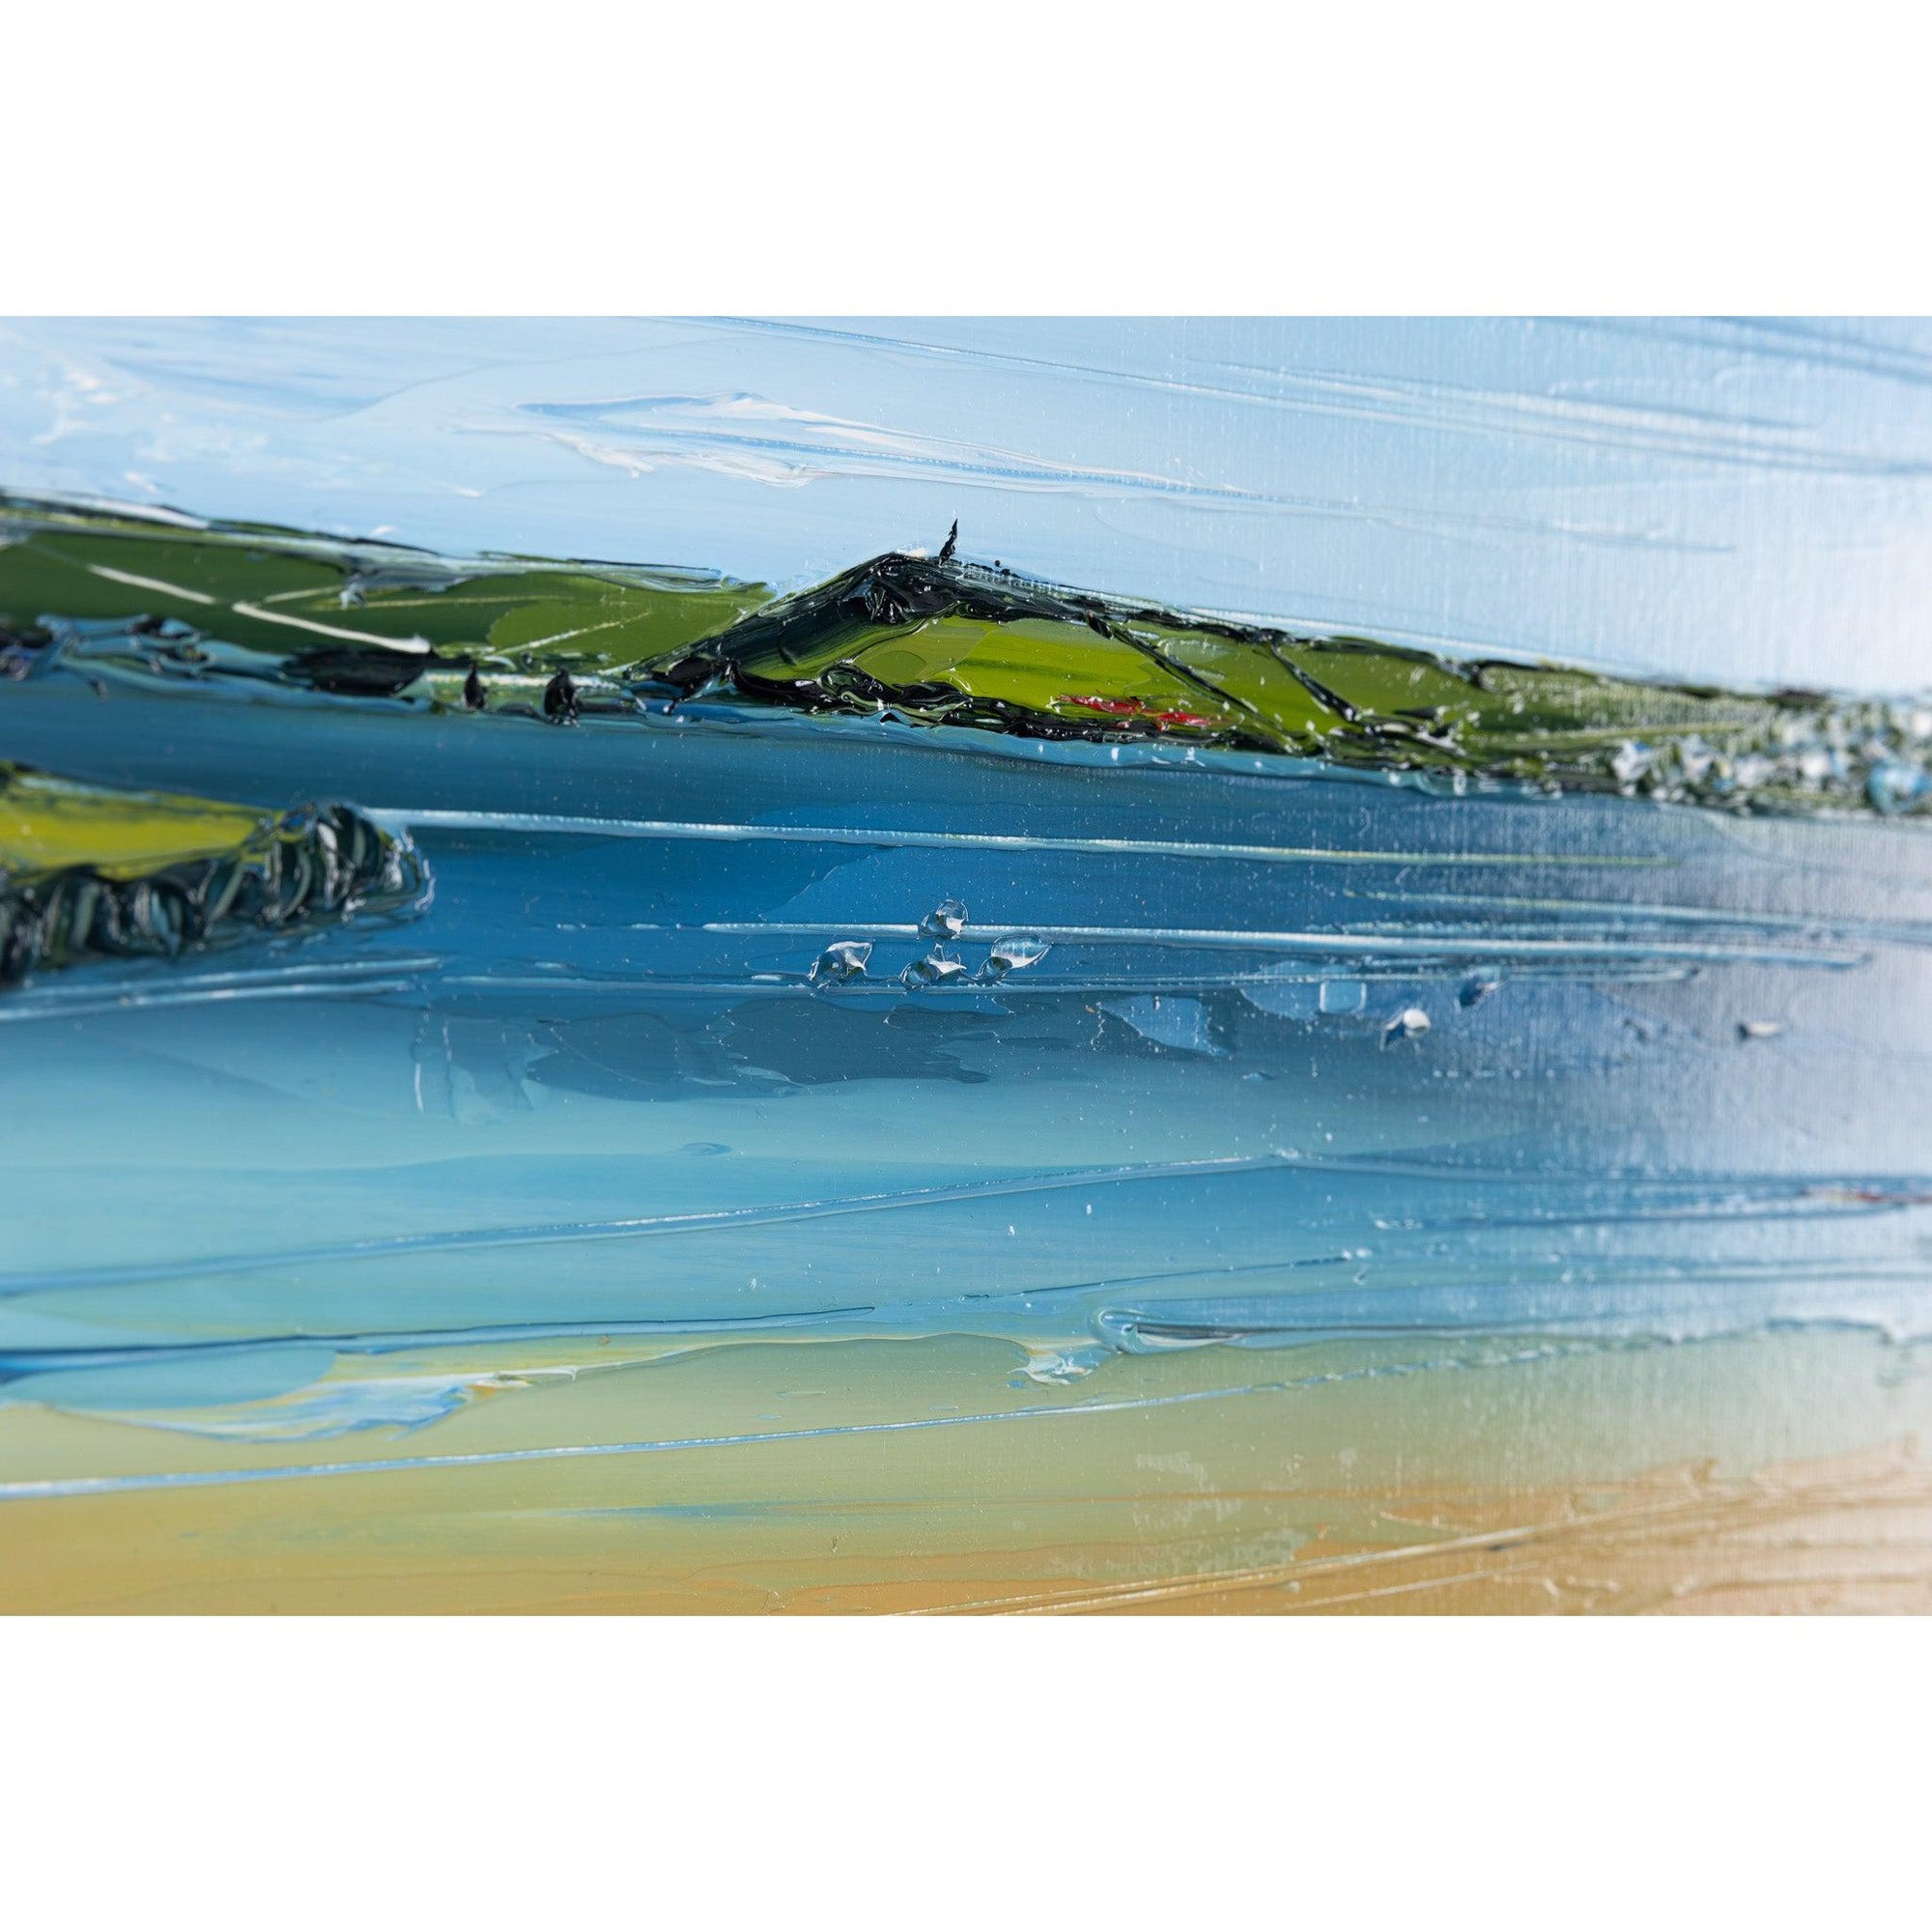 'Padstow Blue' oil framed original by Georgia Hart, available at Padstow Gallery, Cornwall